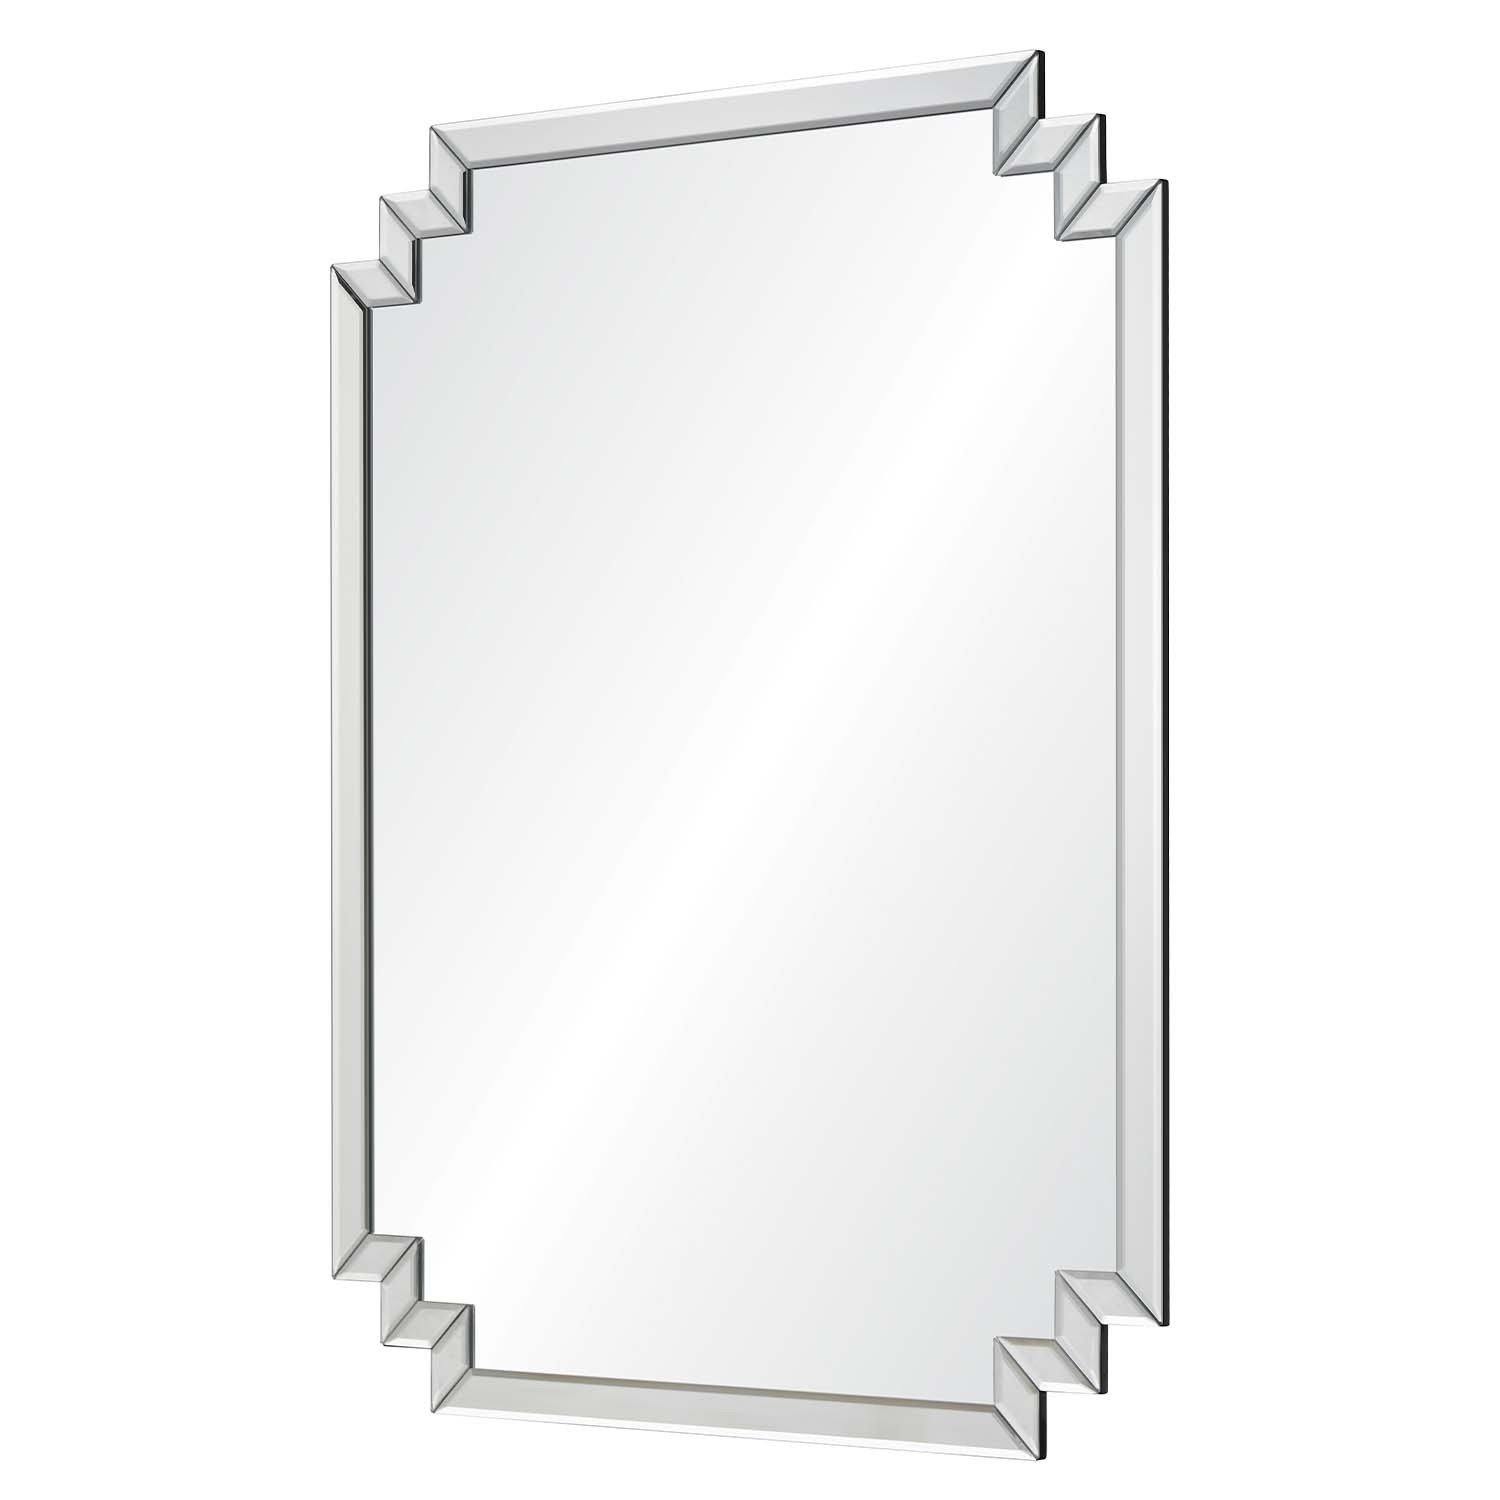 Mirror Home - Mirror Framed Wall Mirror by Celerie Kemble - Side